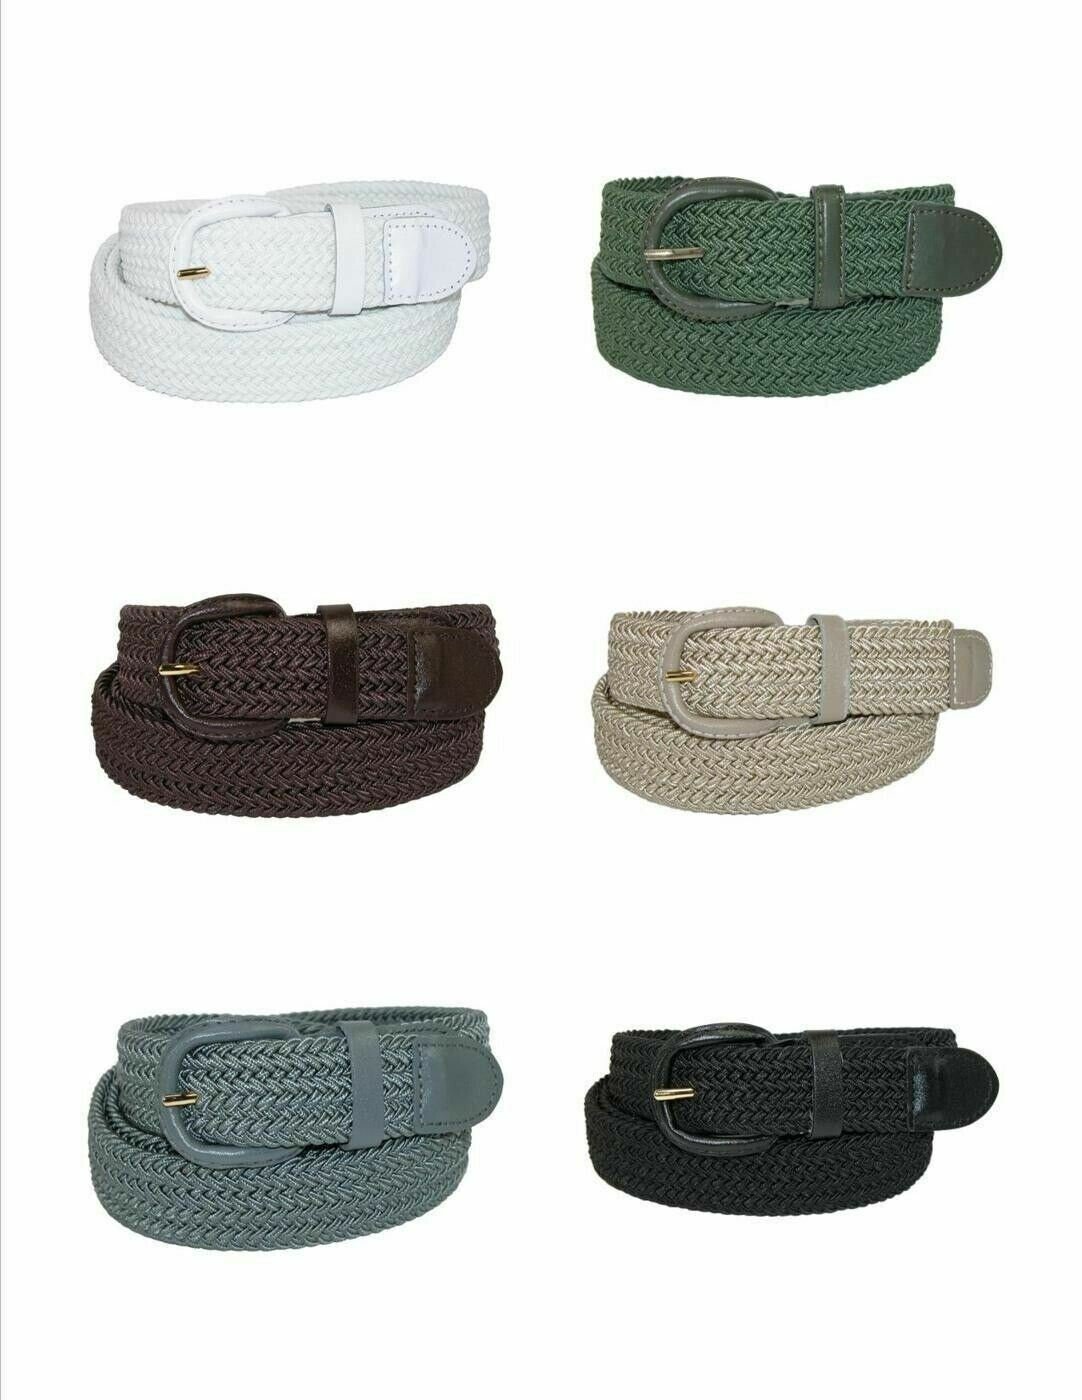 7001 Men's New Leather Covered Buckle Woven Elastic Stretch Belt 1-1/4